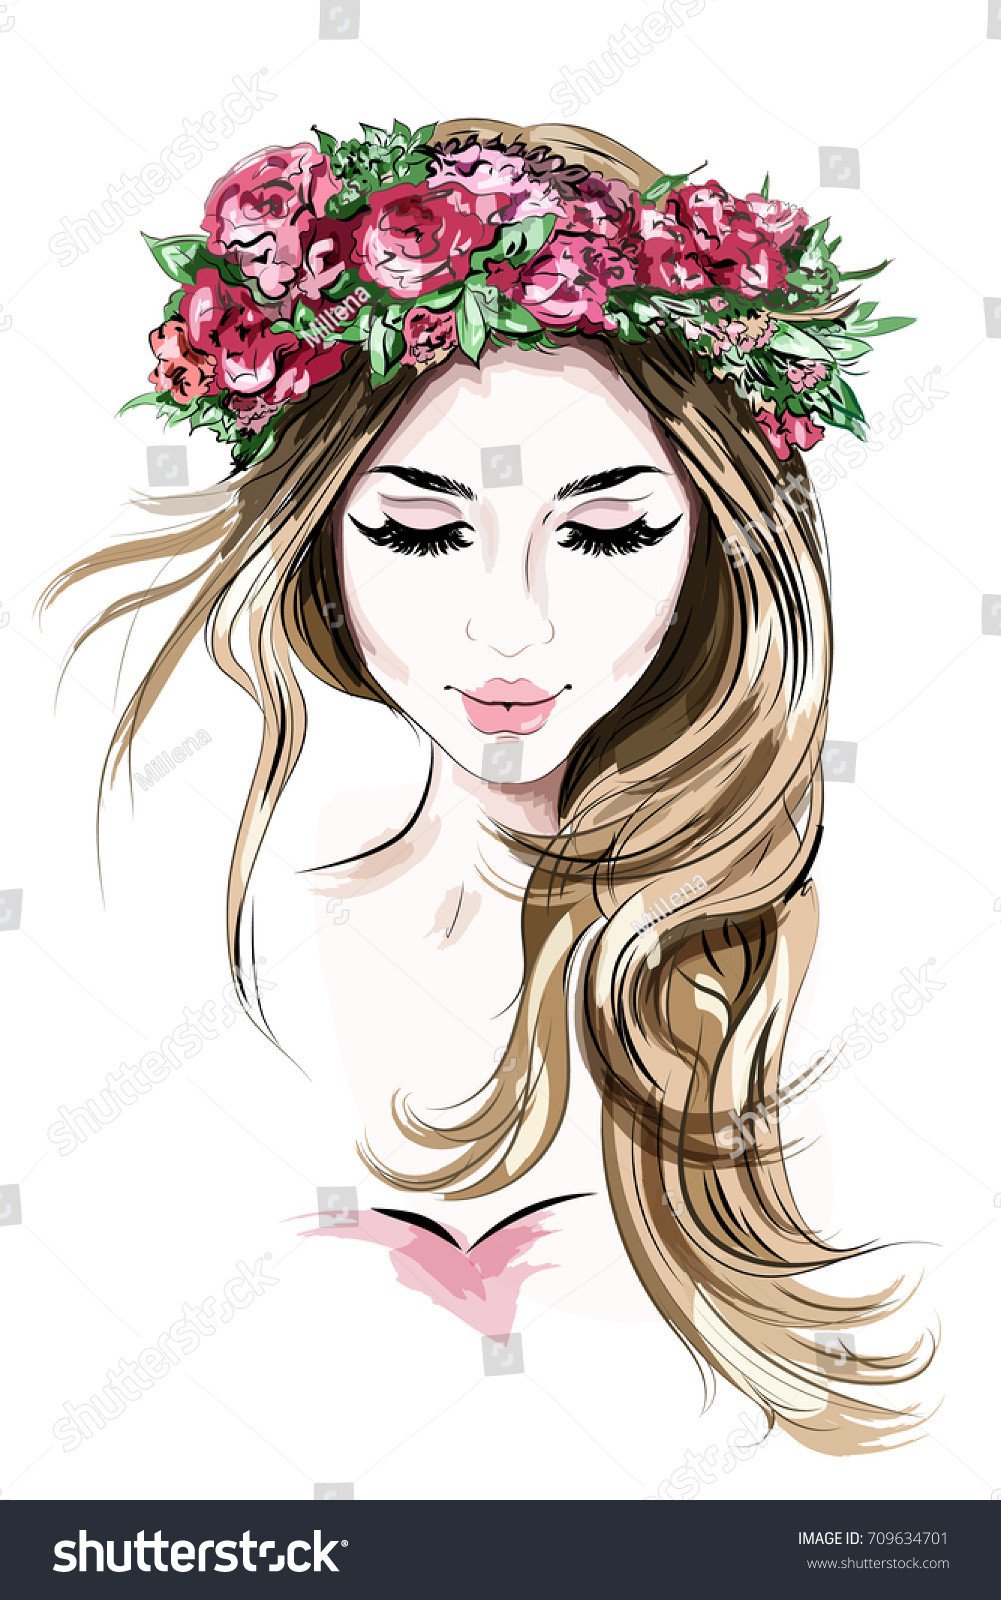 Drawn Pictures Of Girls Hand Drawn Beautiful Young Woman Flower Stock Vector